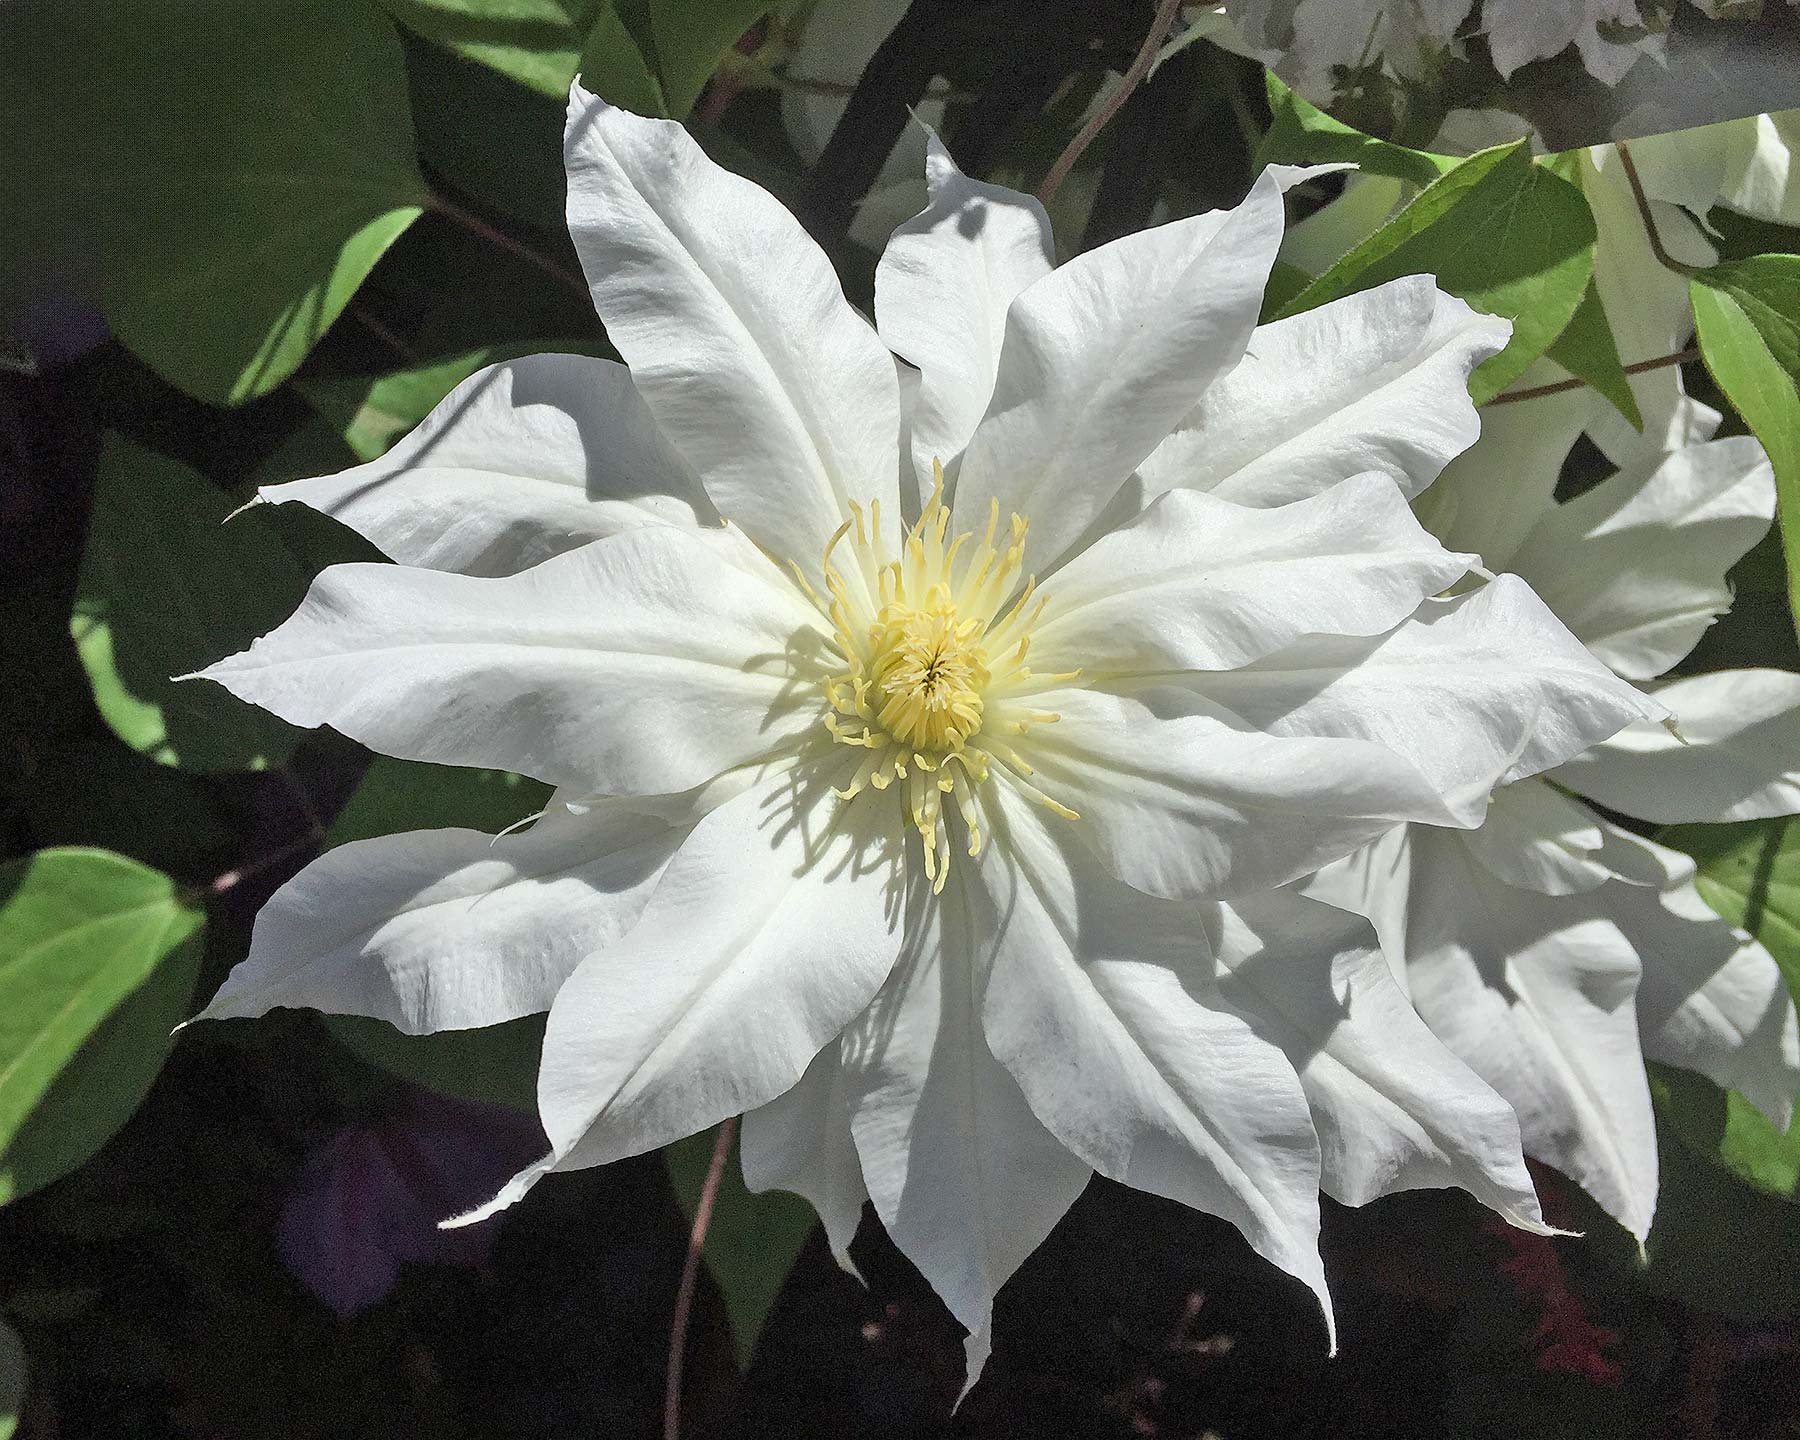 Clematis Arctic Queen has large white double flowers - Group 2